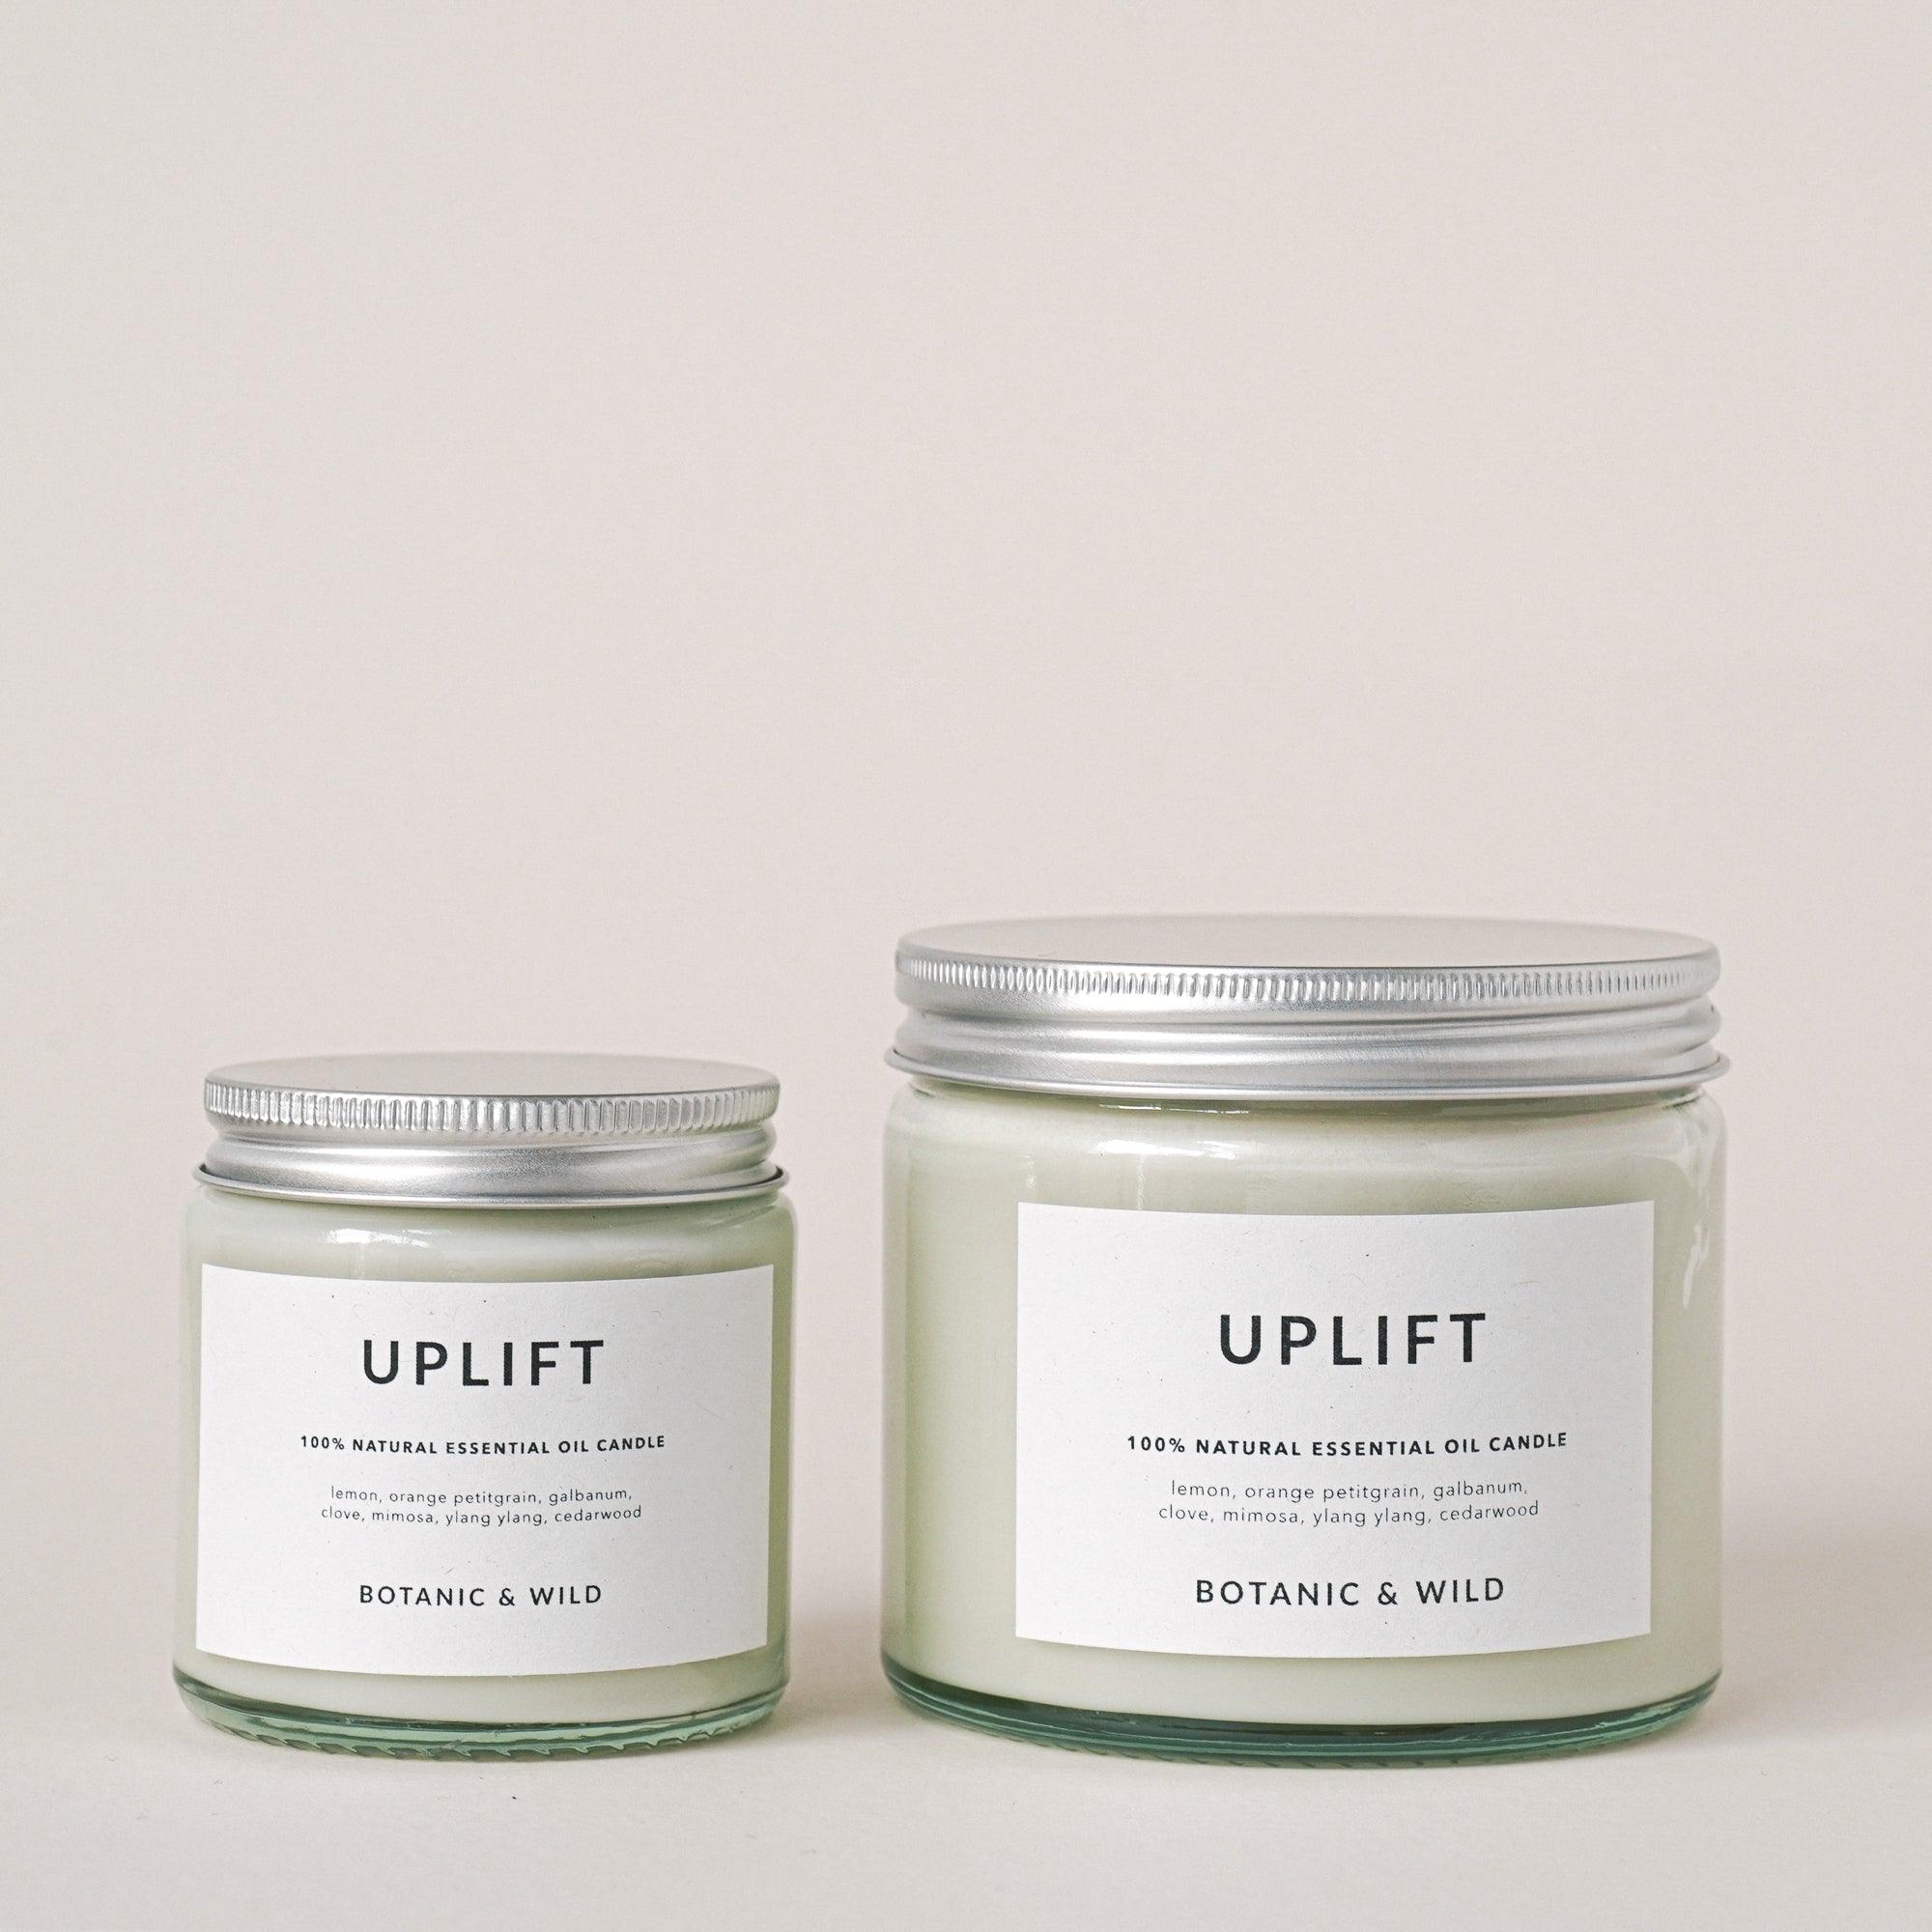 UPLIFT Essential Oil Soy Candles - Botanic & Wild